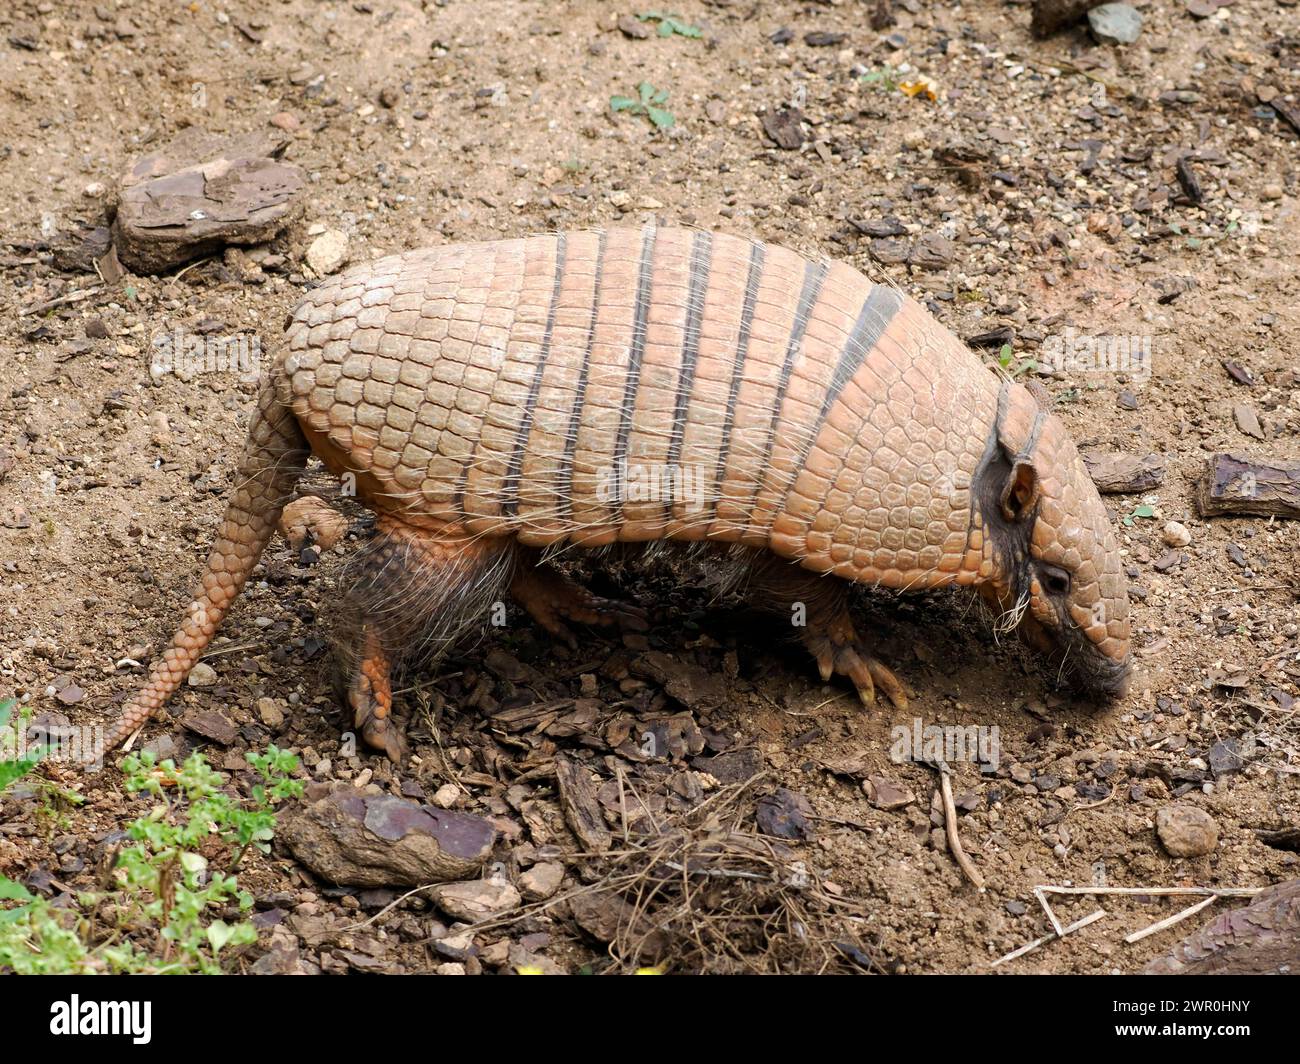 Six-banded armadillo (Euphractus sexcinctus) walking on a ground and seen from profile Stock Photo